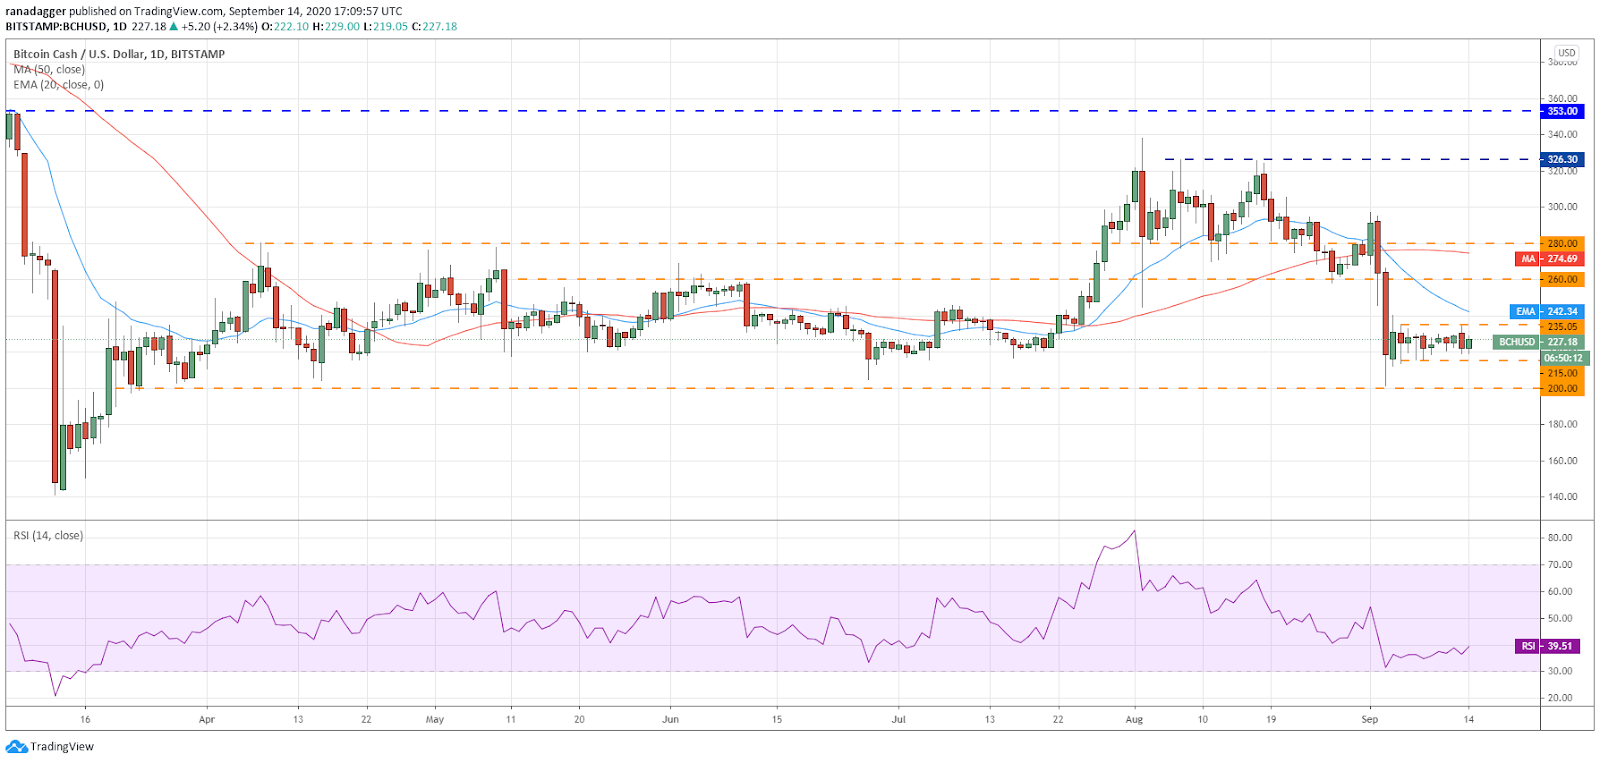 BCH/USD daily chart. Source: TradingView​​​​​​​